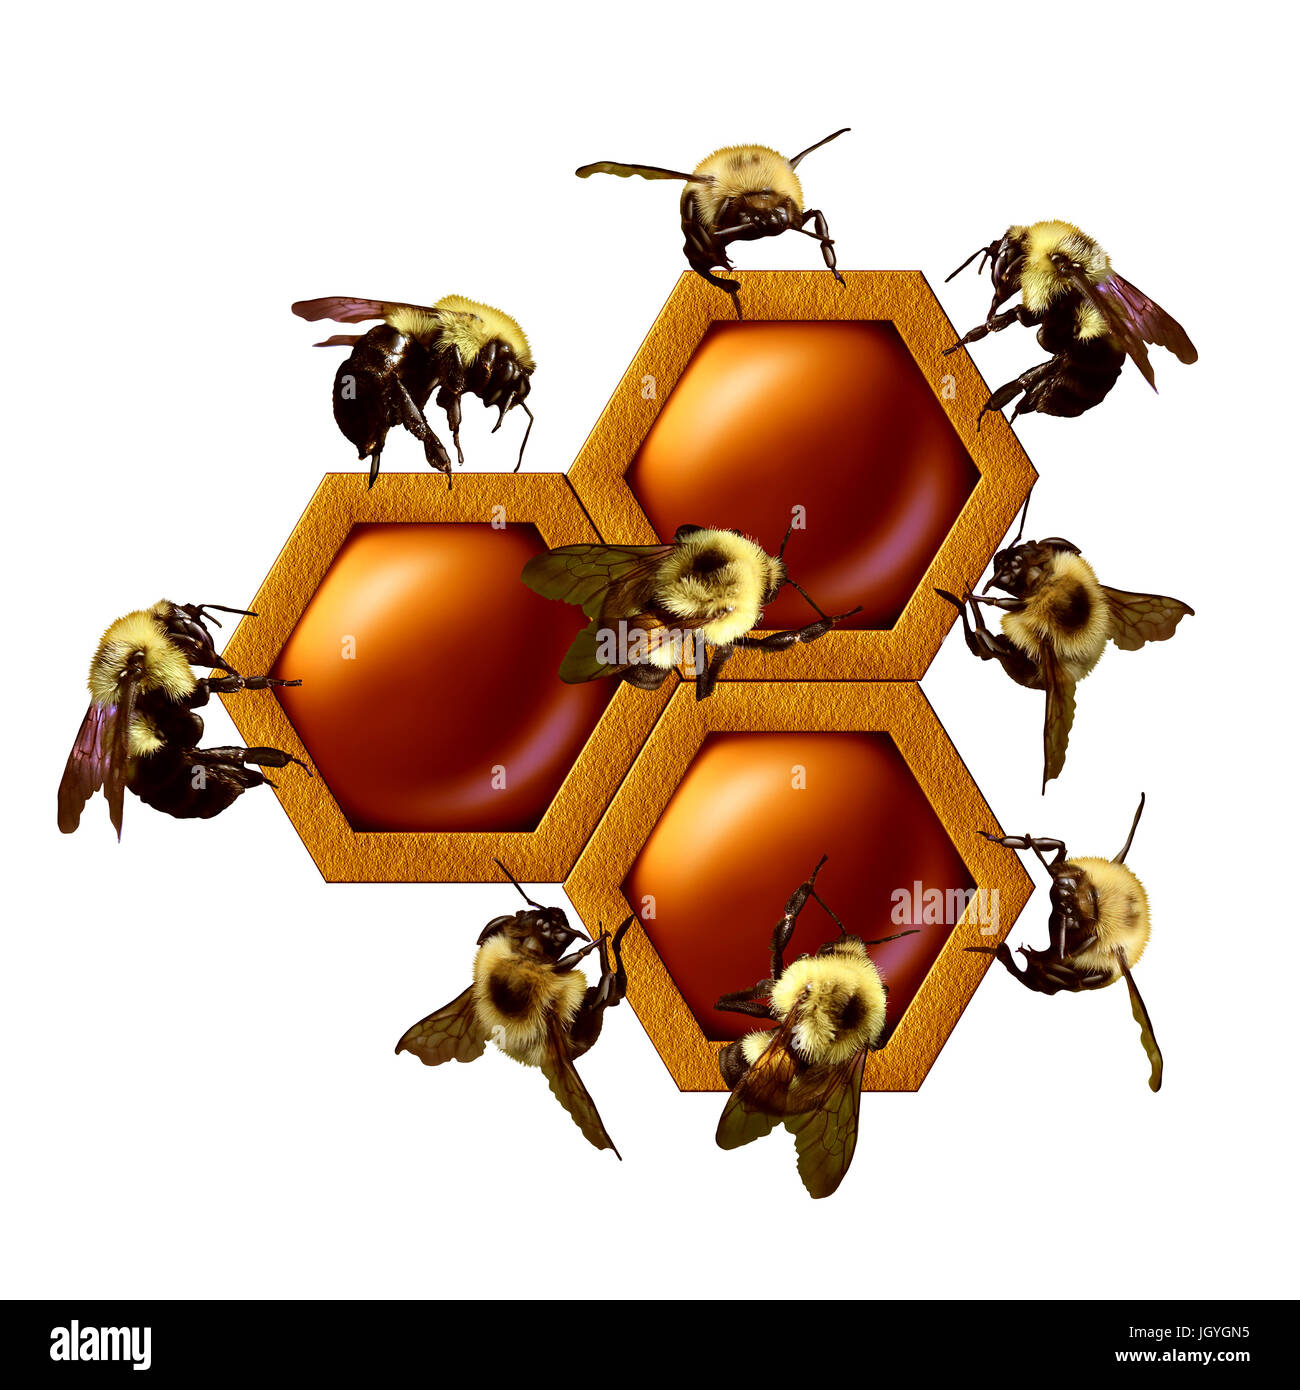 Teamwork project concept as a group of working bees cooperating as a coordinated team constructing a geometrical honey comb as a business. Stock Photo